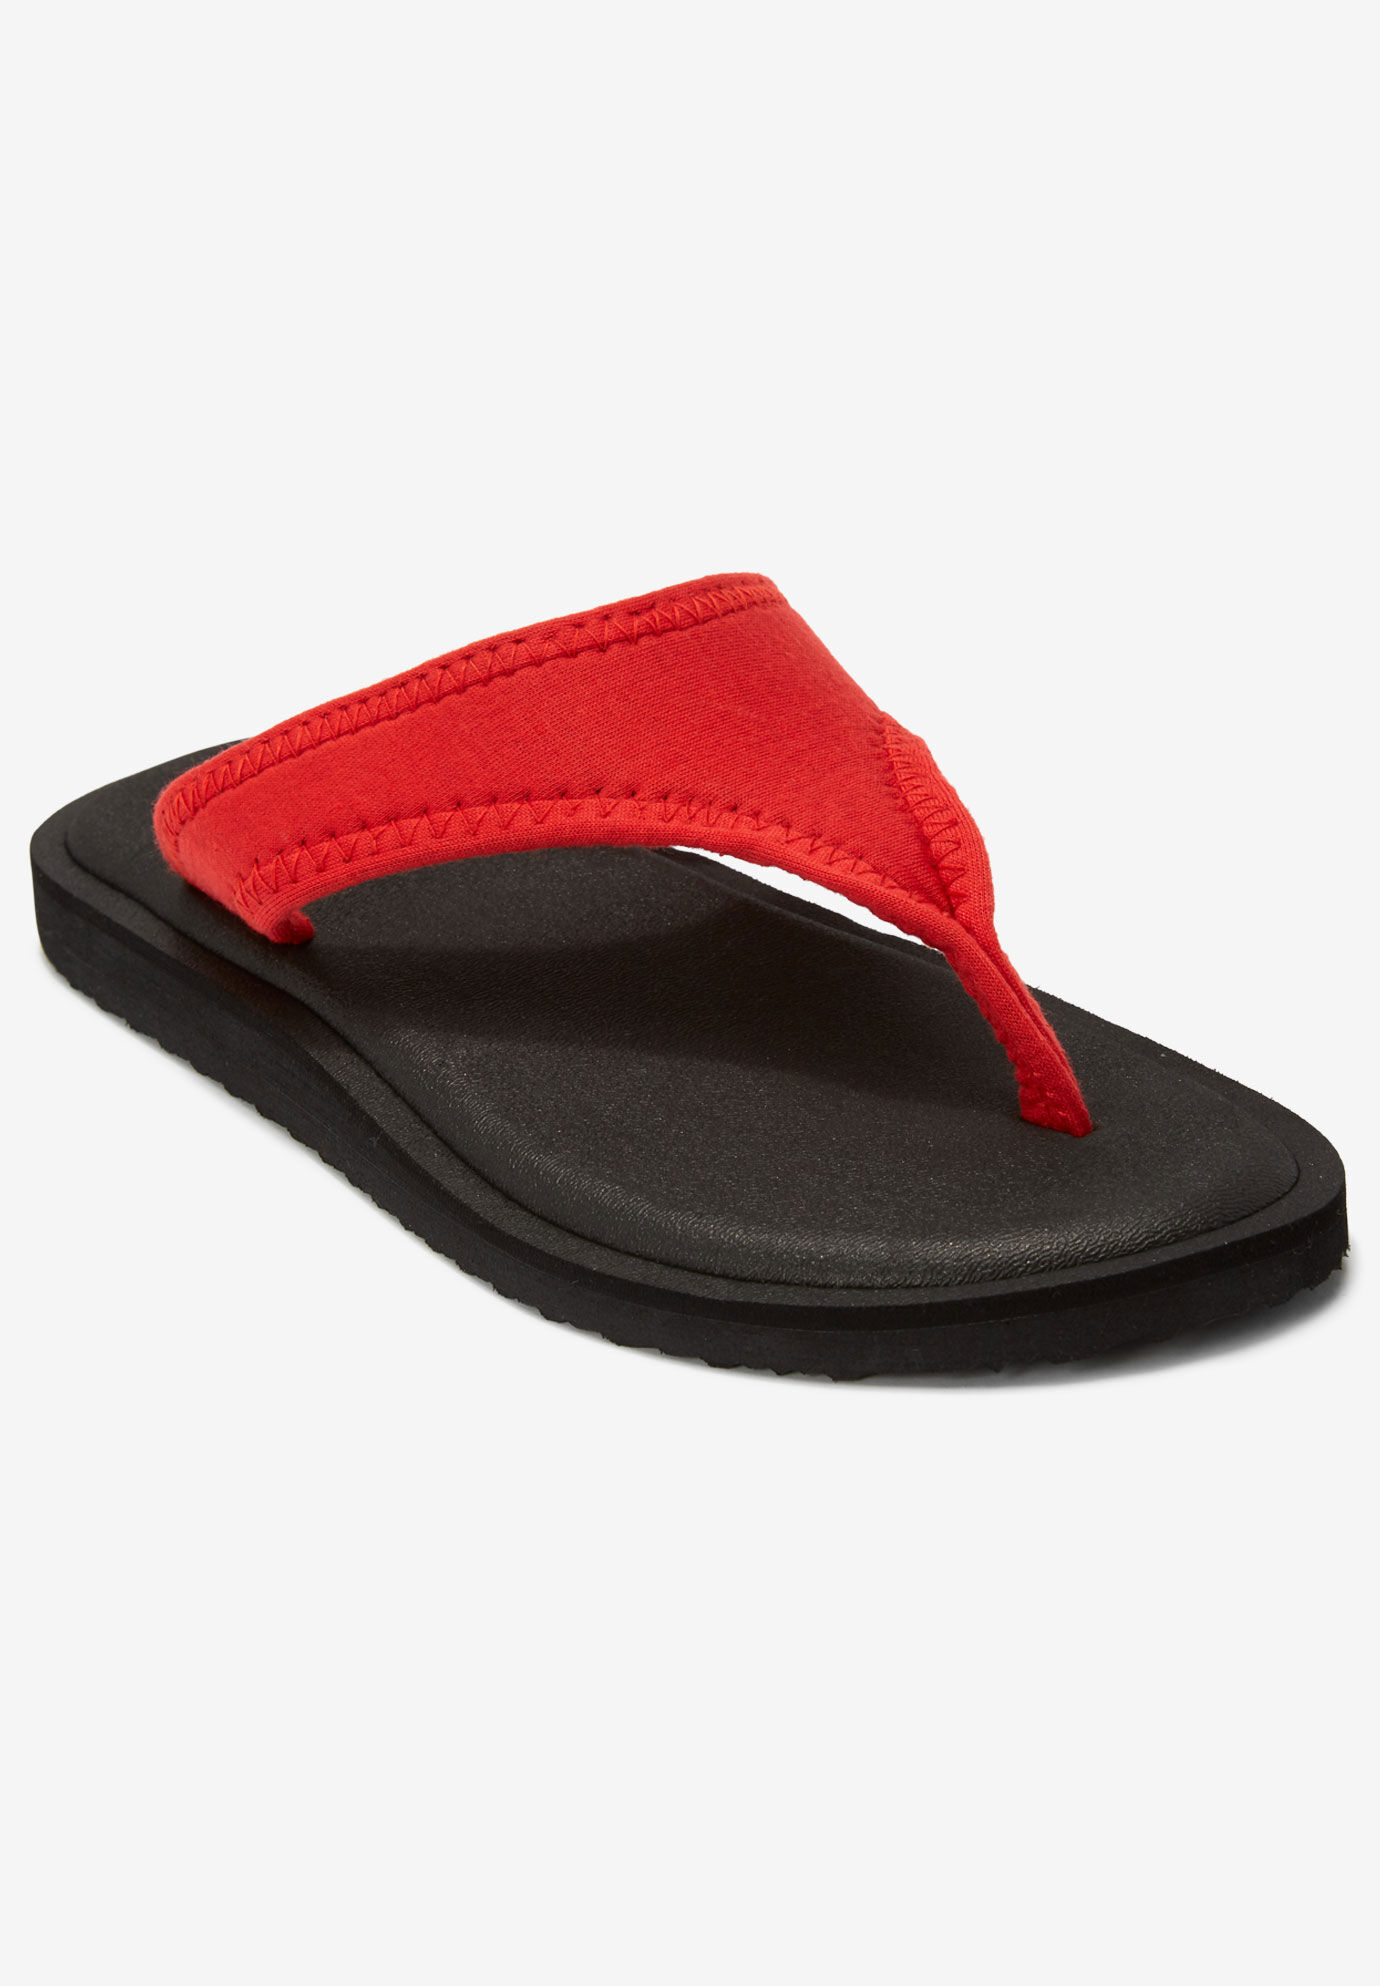 Wide \u0026 Extra Wide Width Sandals for 